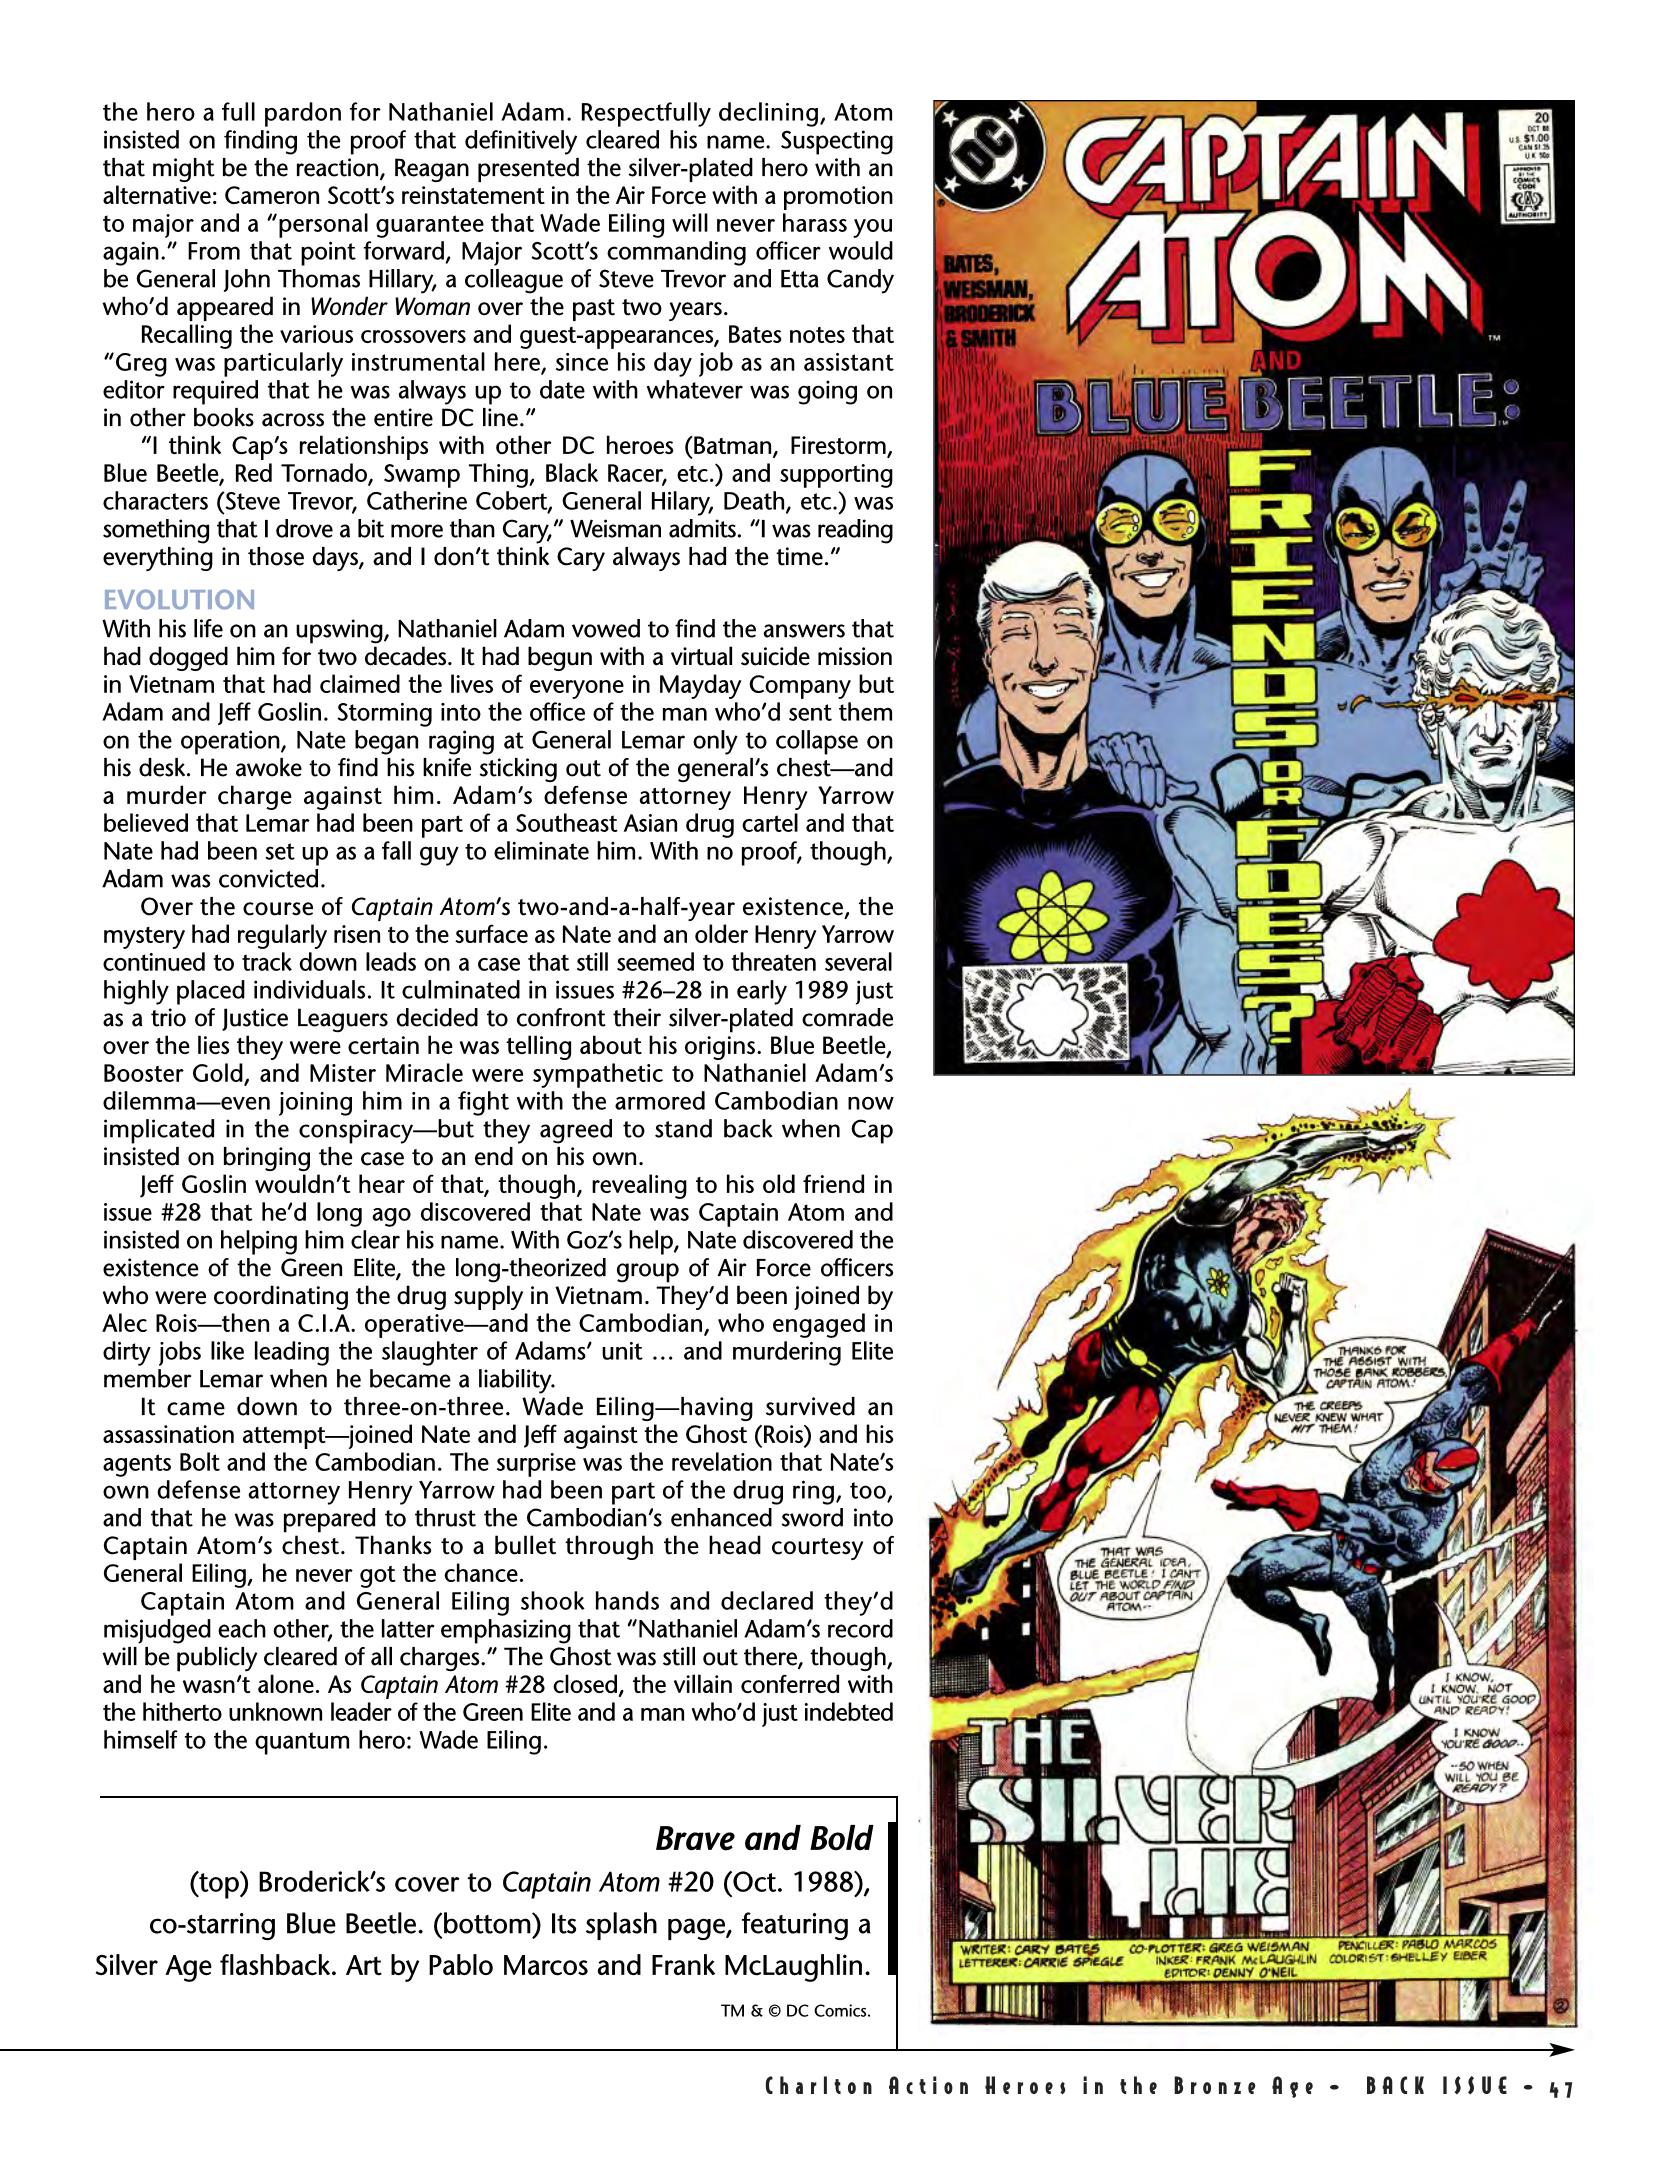 Read online Back Issue comic -  Issue #79 - 49